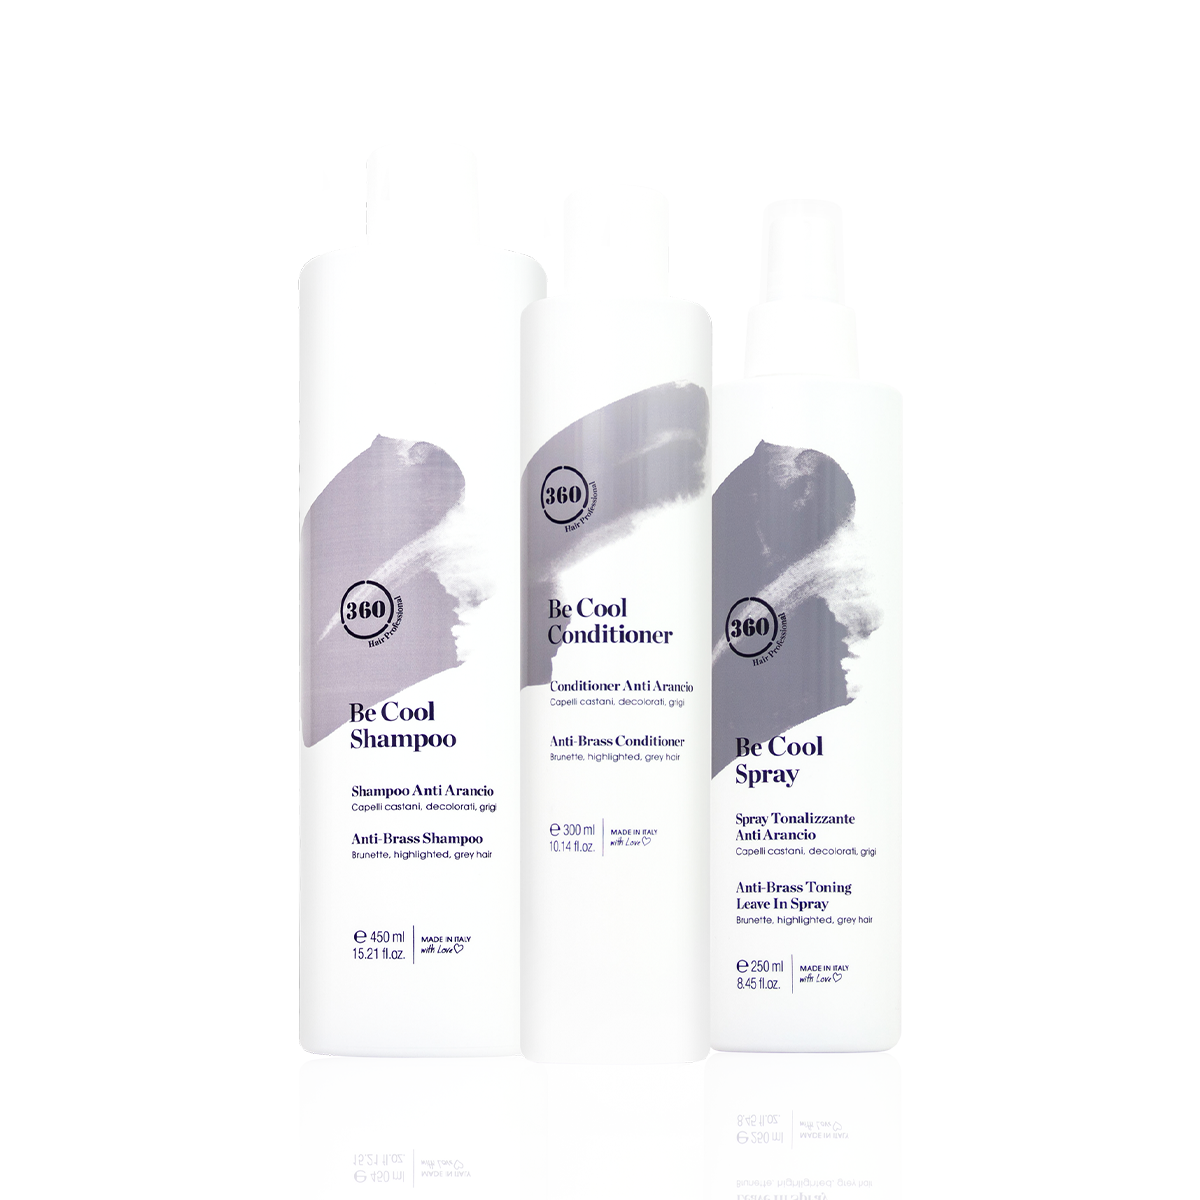 360 BE COOL SHAMPOO CONDITIONER BE COOL SPRAY BUNDLE